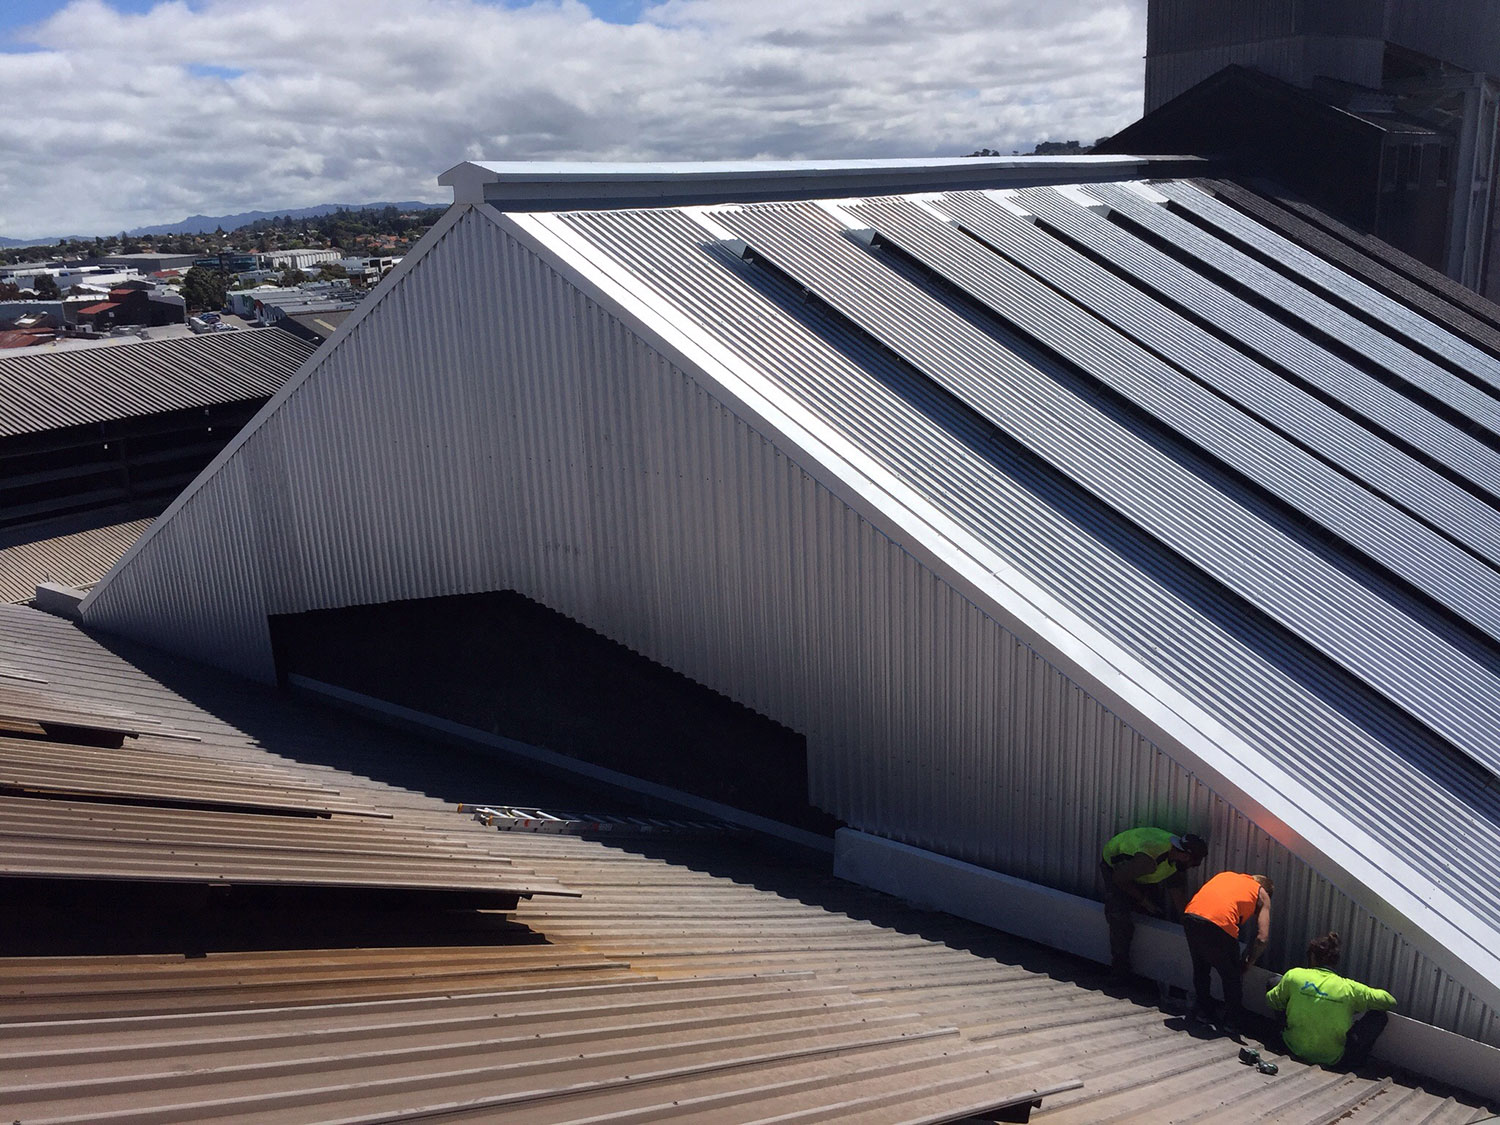 auckland roofing solutions services auckland and new zealand wide new roofs repair cladding and more Project gallery 46